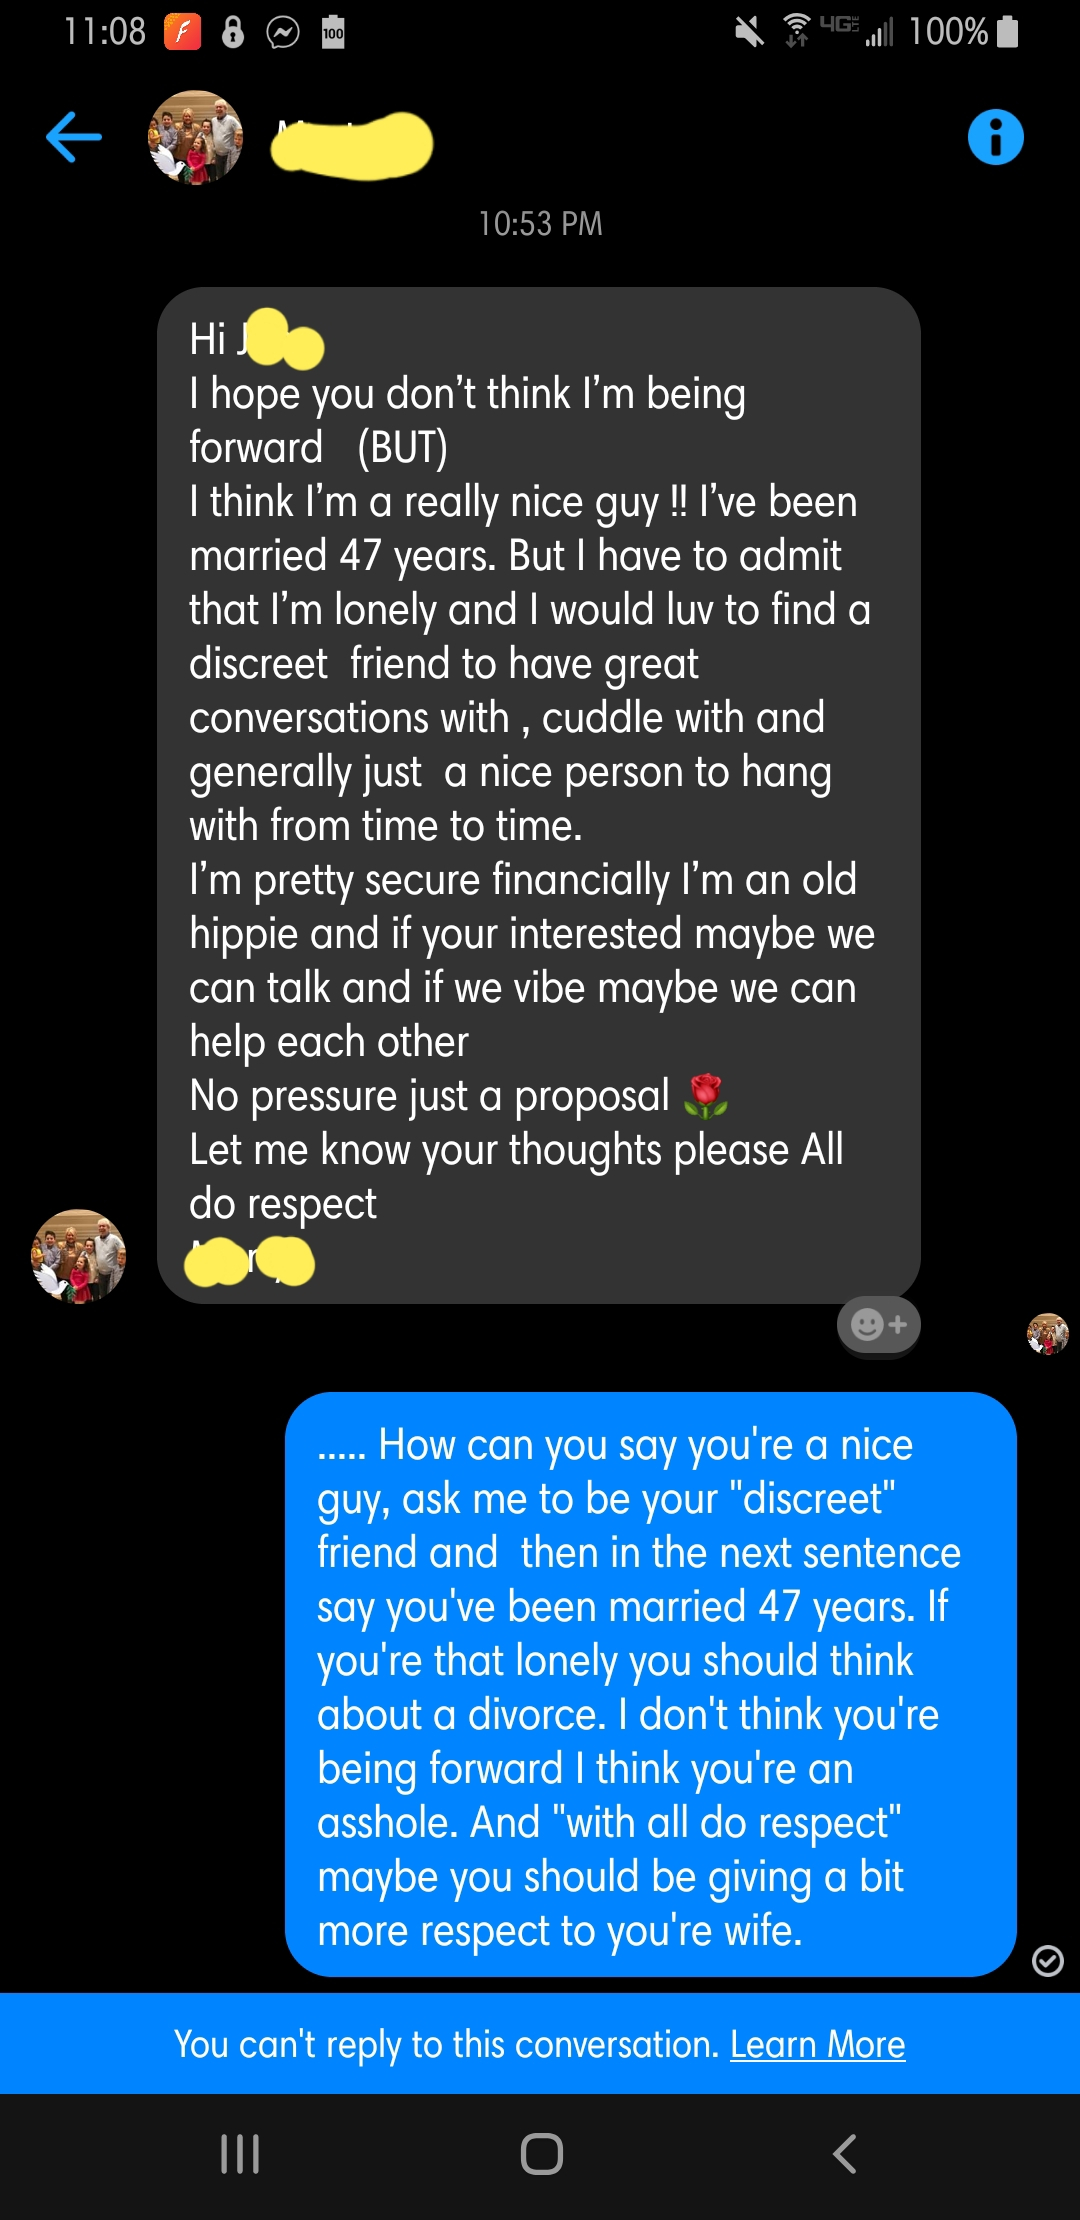 screenshot - 8 Hi I hope you don't think I'm being forward But I think I'm a really nice guy !! I've been mamed 47 years. But I have to admit that I'm lonely and I would luv to find a discreet friend to have great conversations with, cuddle with and gener